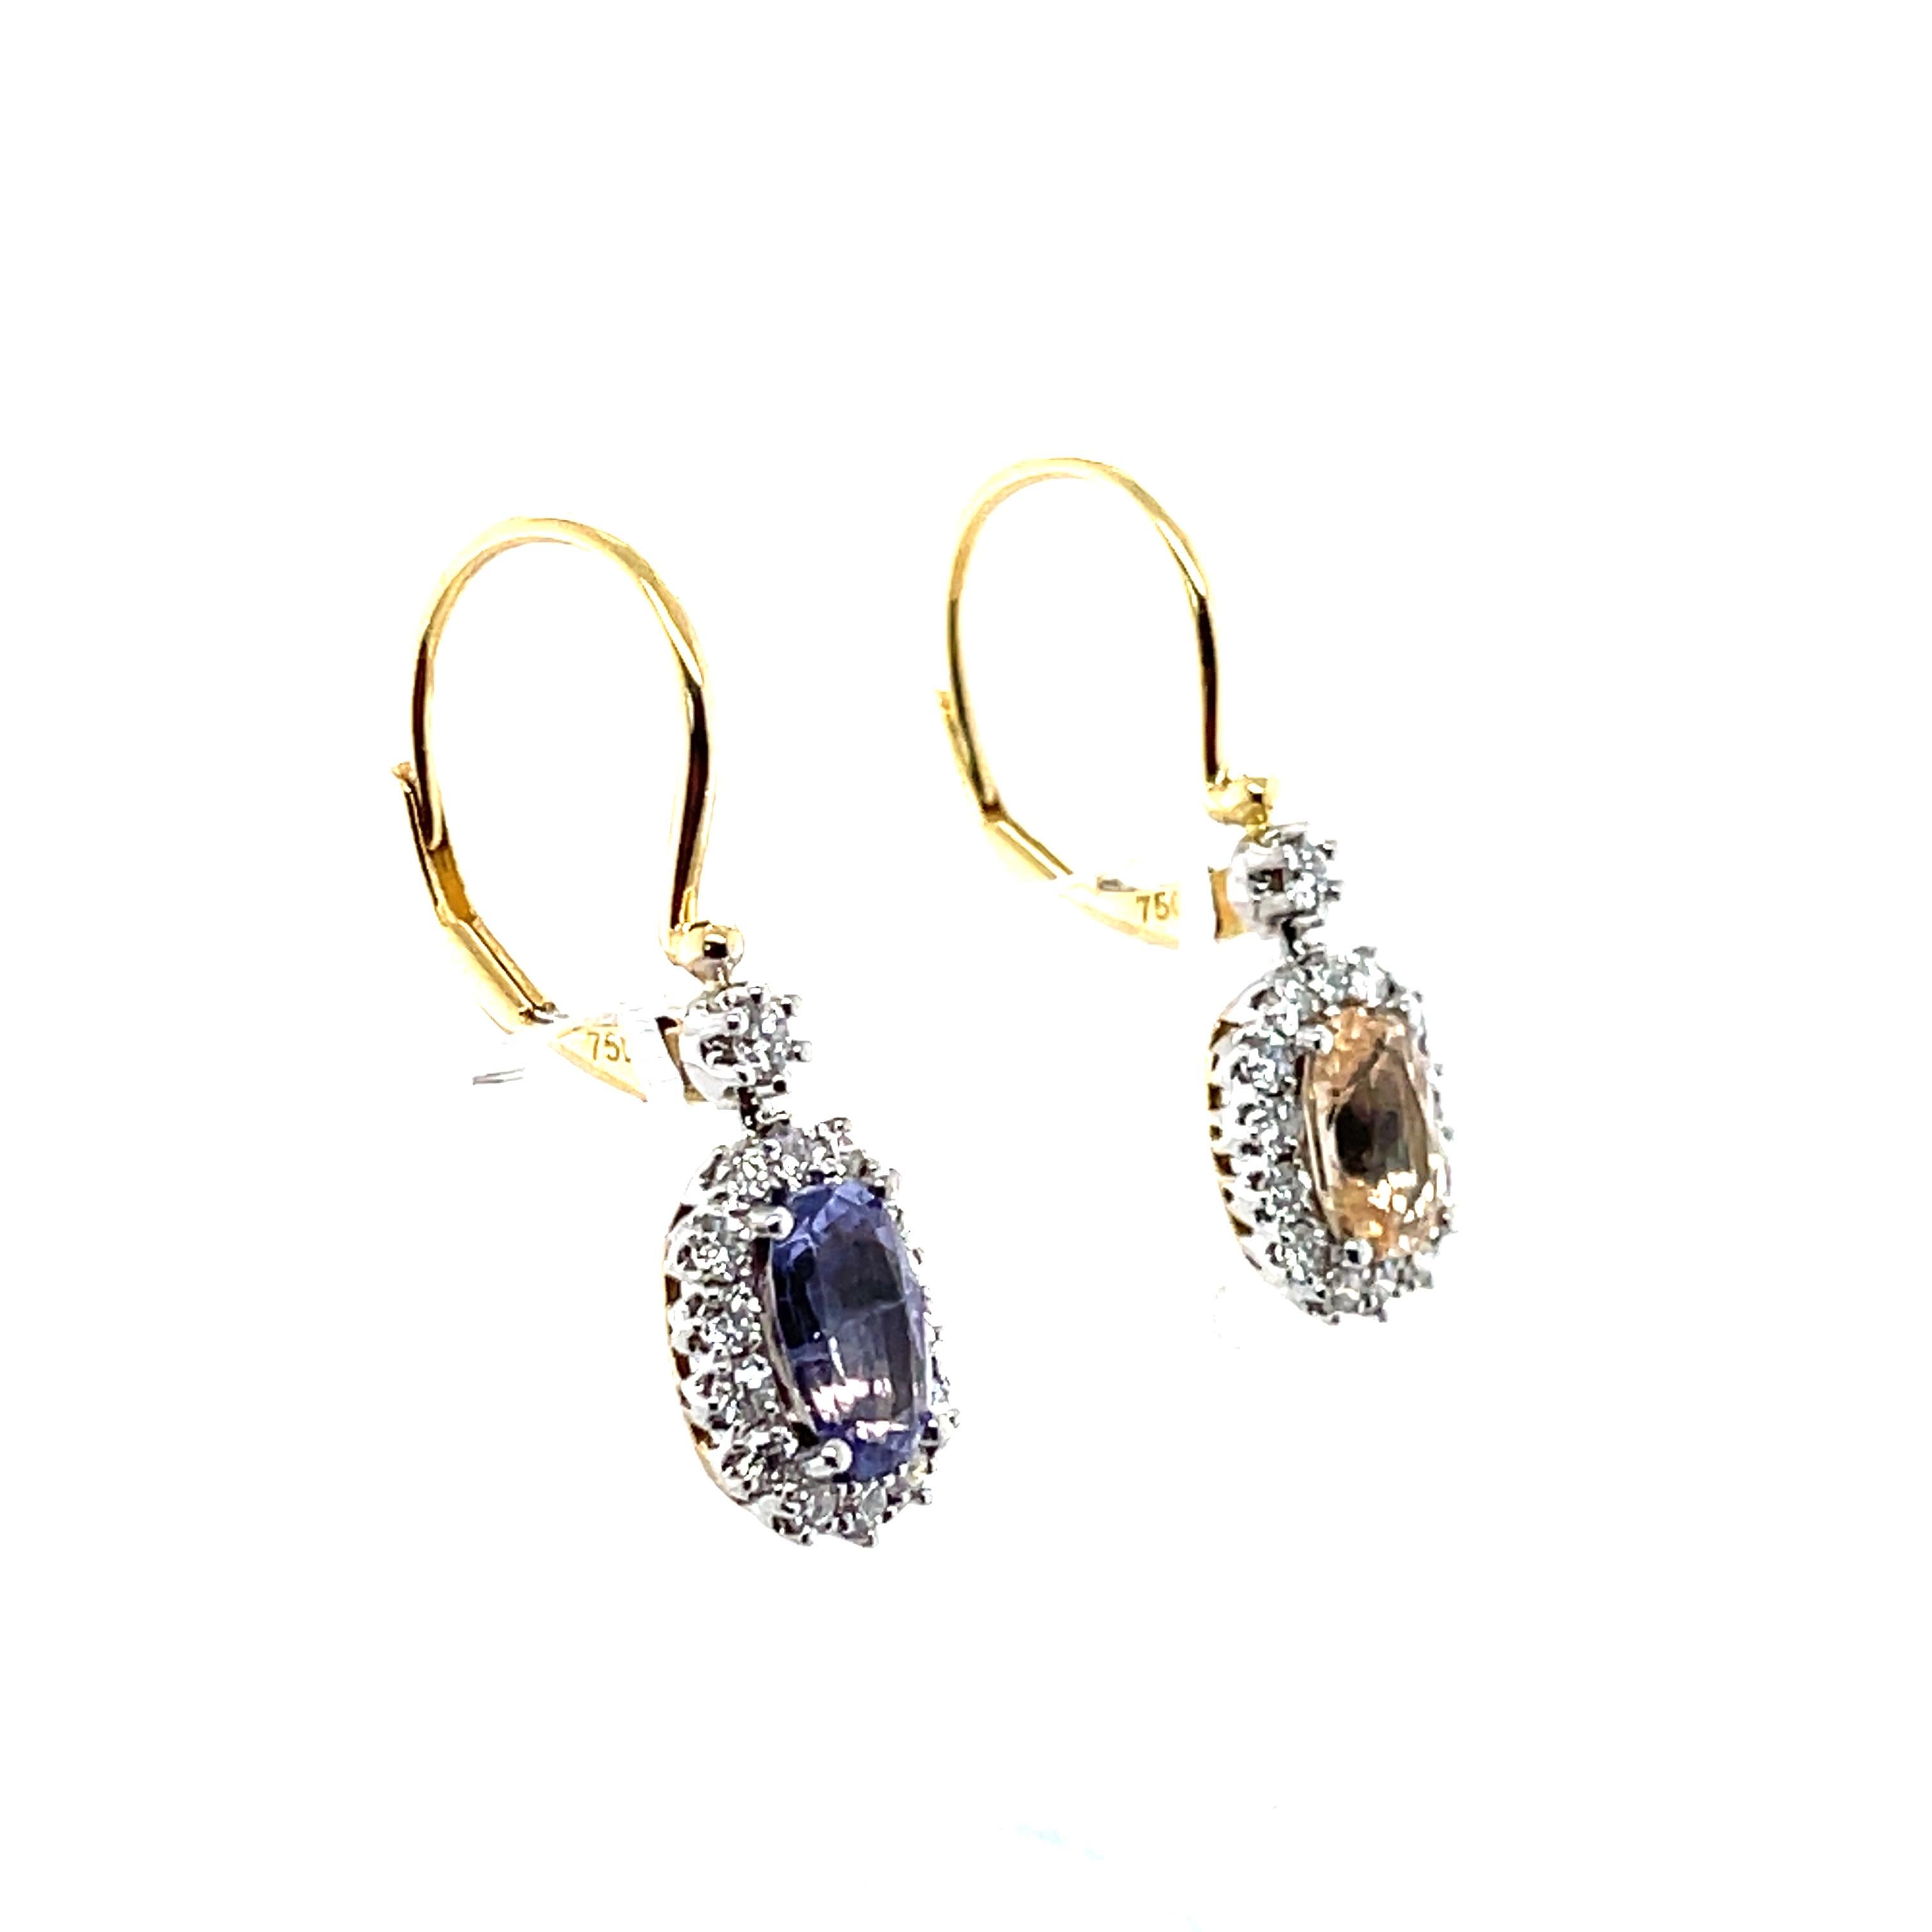 Claw set cushion and oval yellow and purple no heat sapphires, crafted with Eighteen karat yellow gold, promoting thirty claw set round brilliant cut diamonds, accompanies by a stunning polished finish design.

Sapphire Weight: 2.28ct
Sapphire